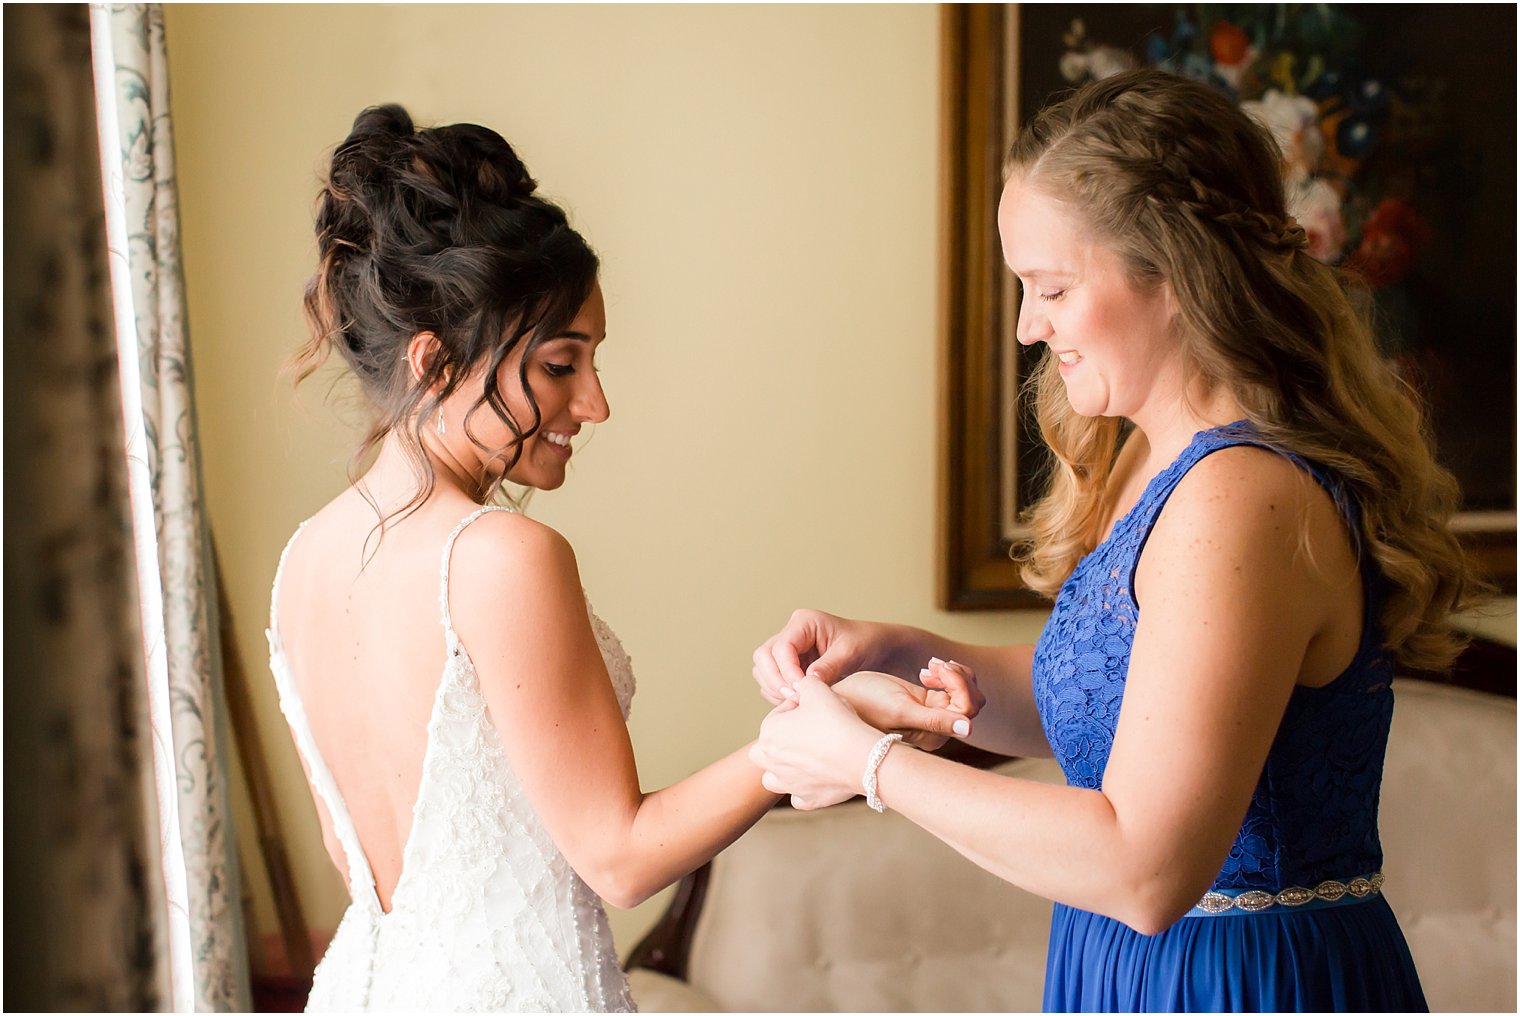 Bride getting ready with maid of honor